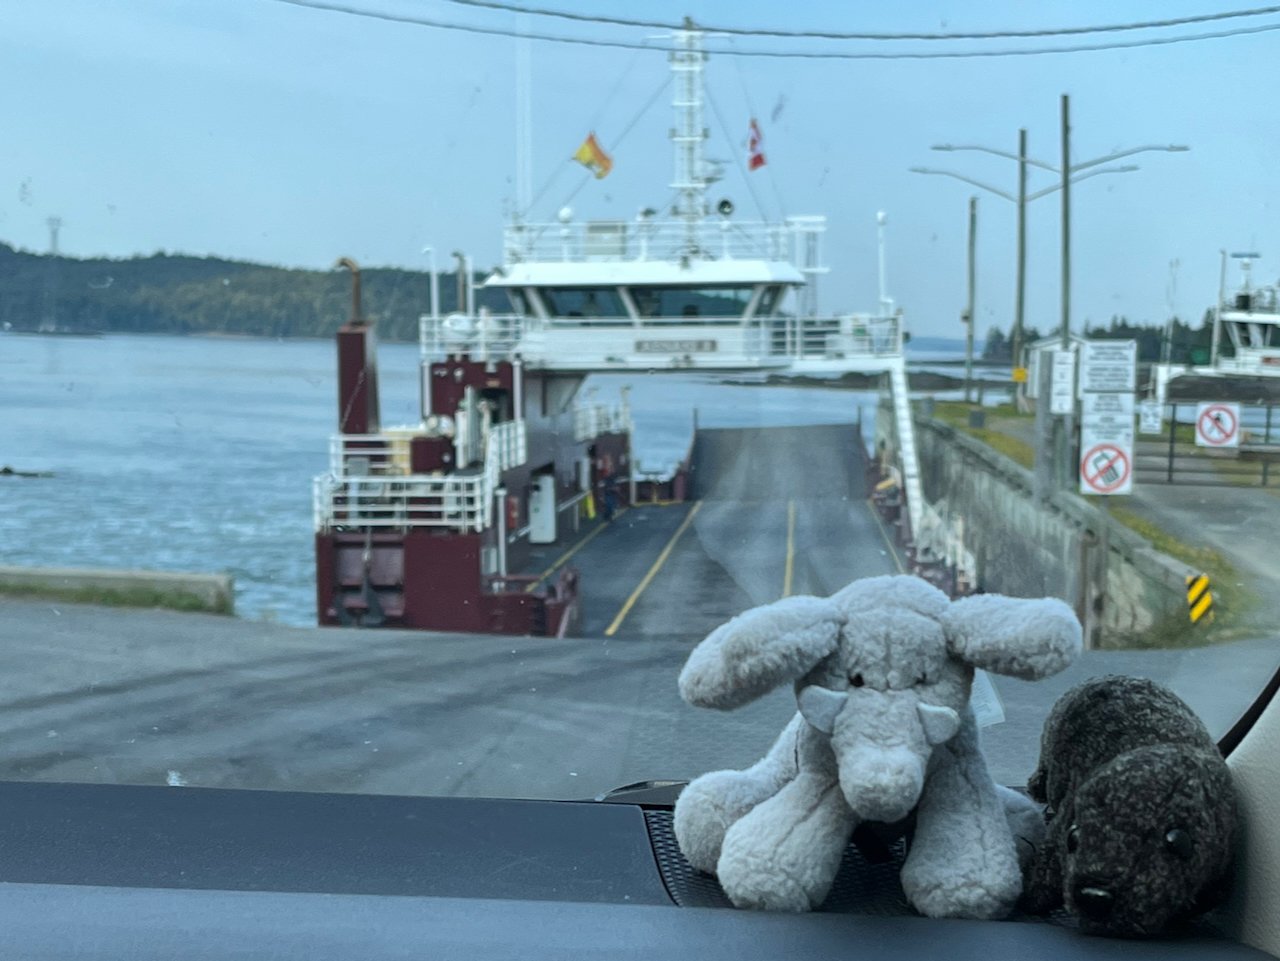 Waiting for the Deer Island Ferry